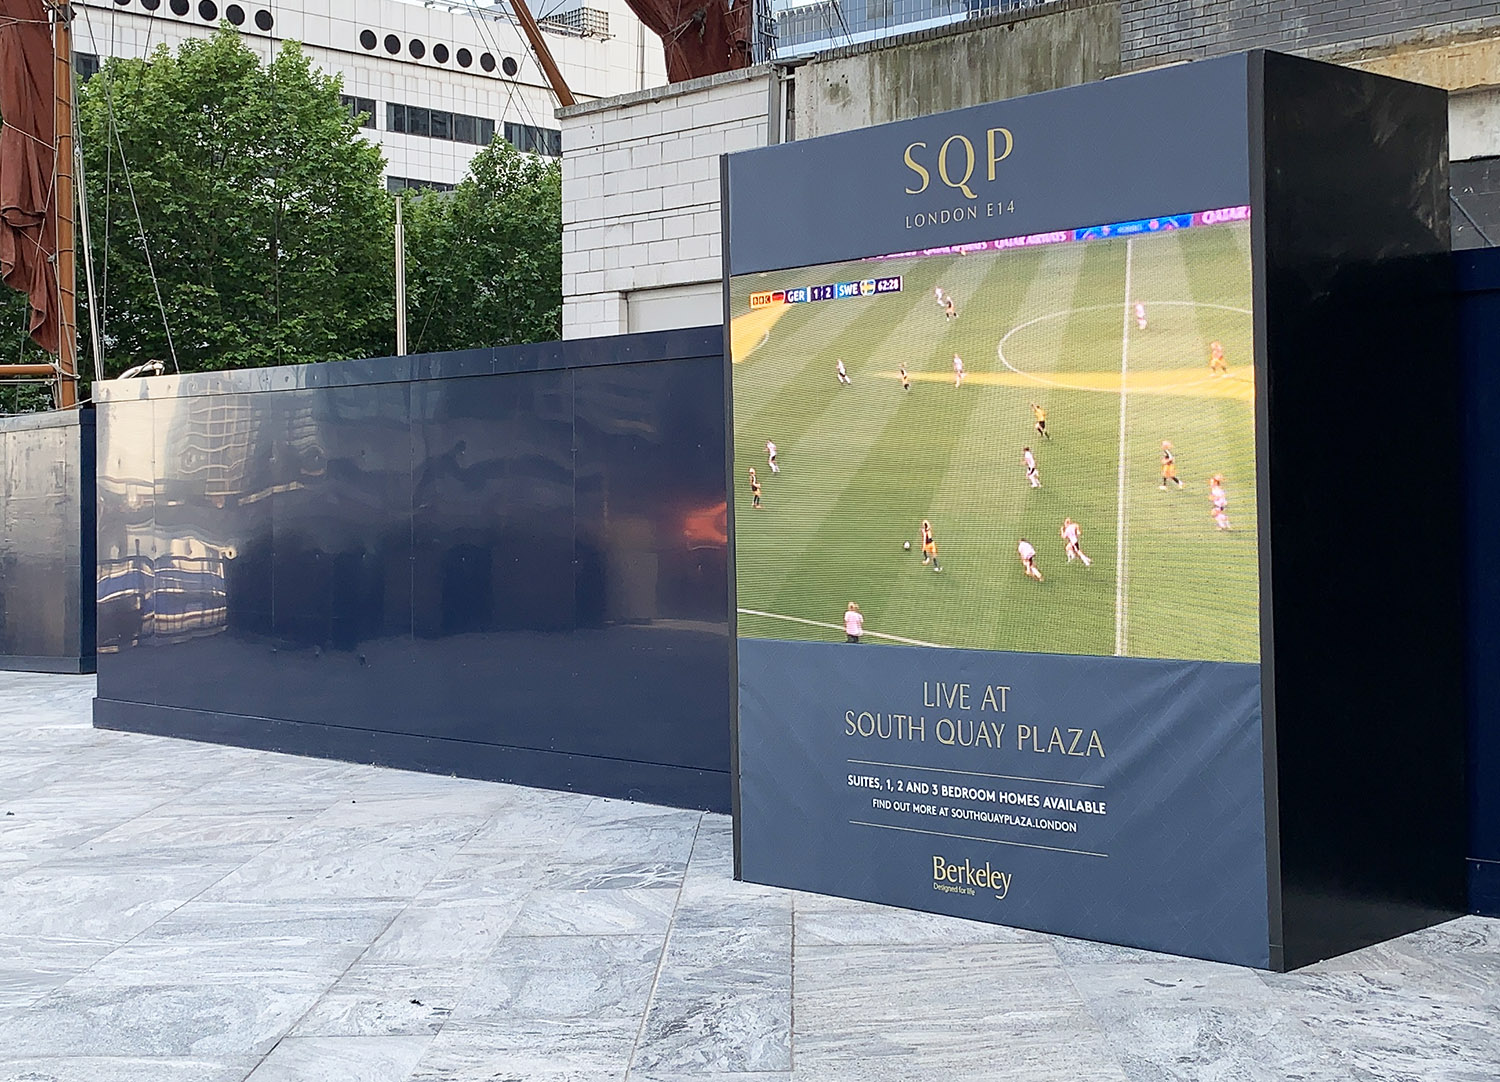 Public garden Outdoor TV LED screen at South Quay Plaza in London